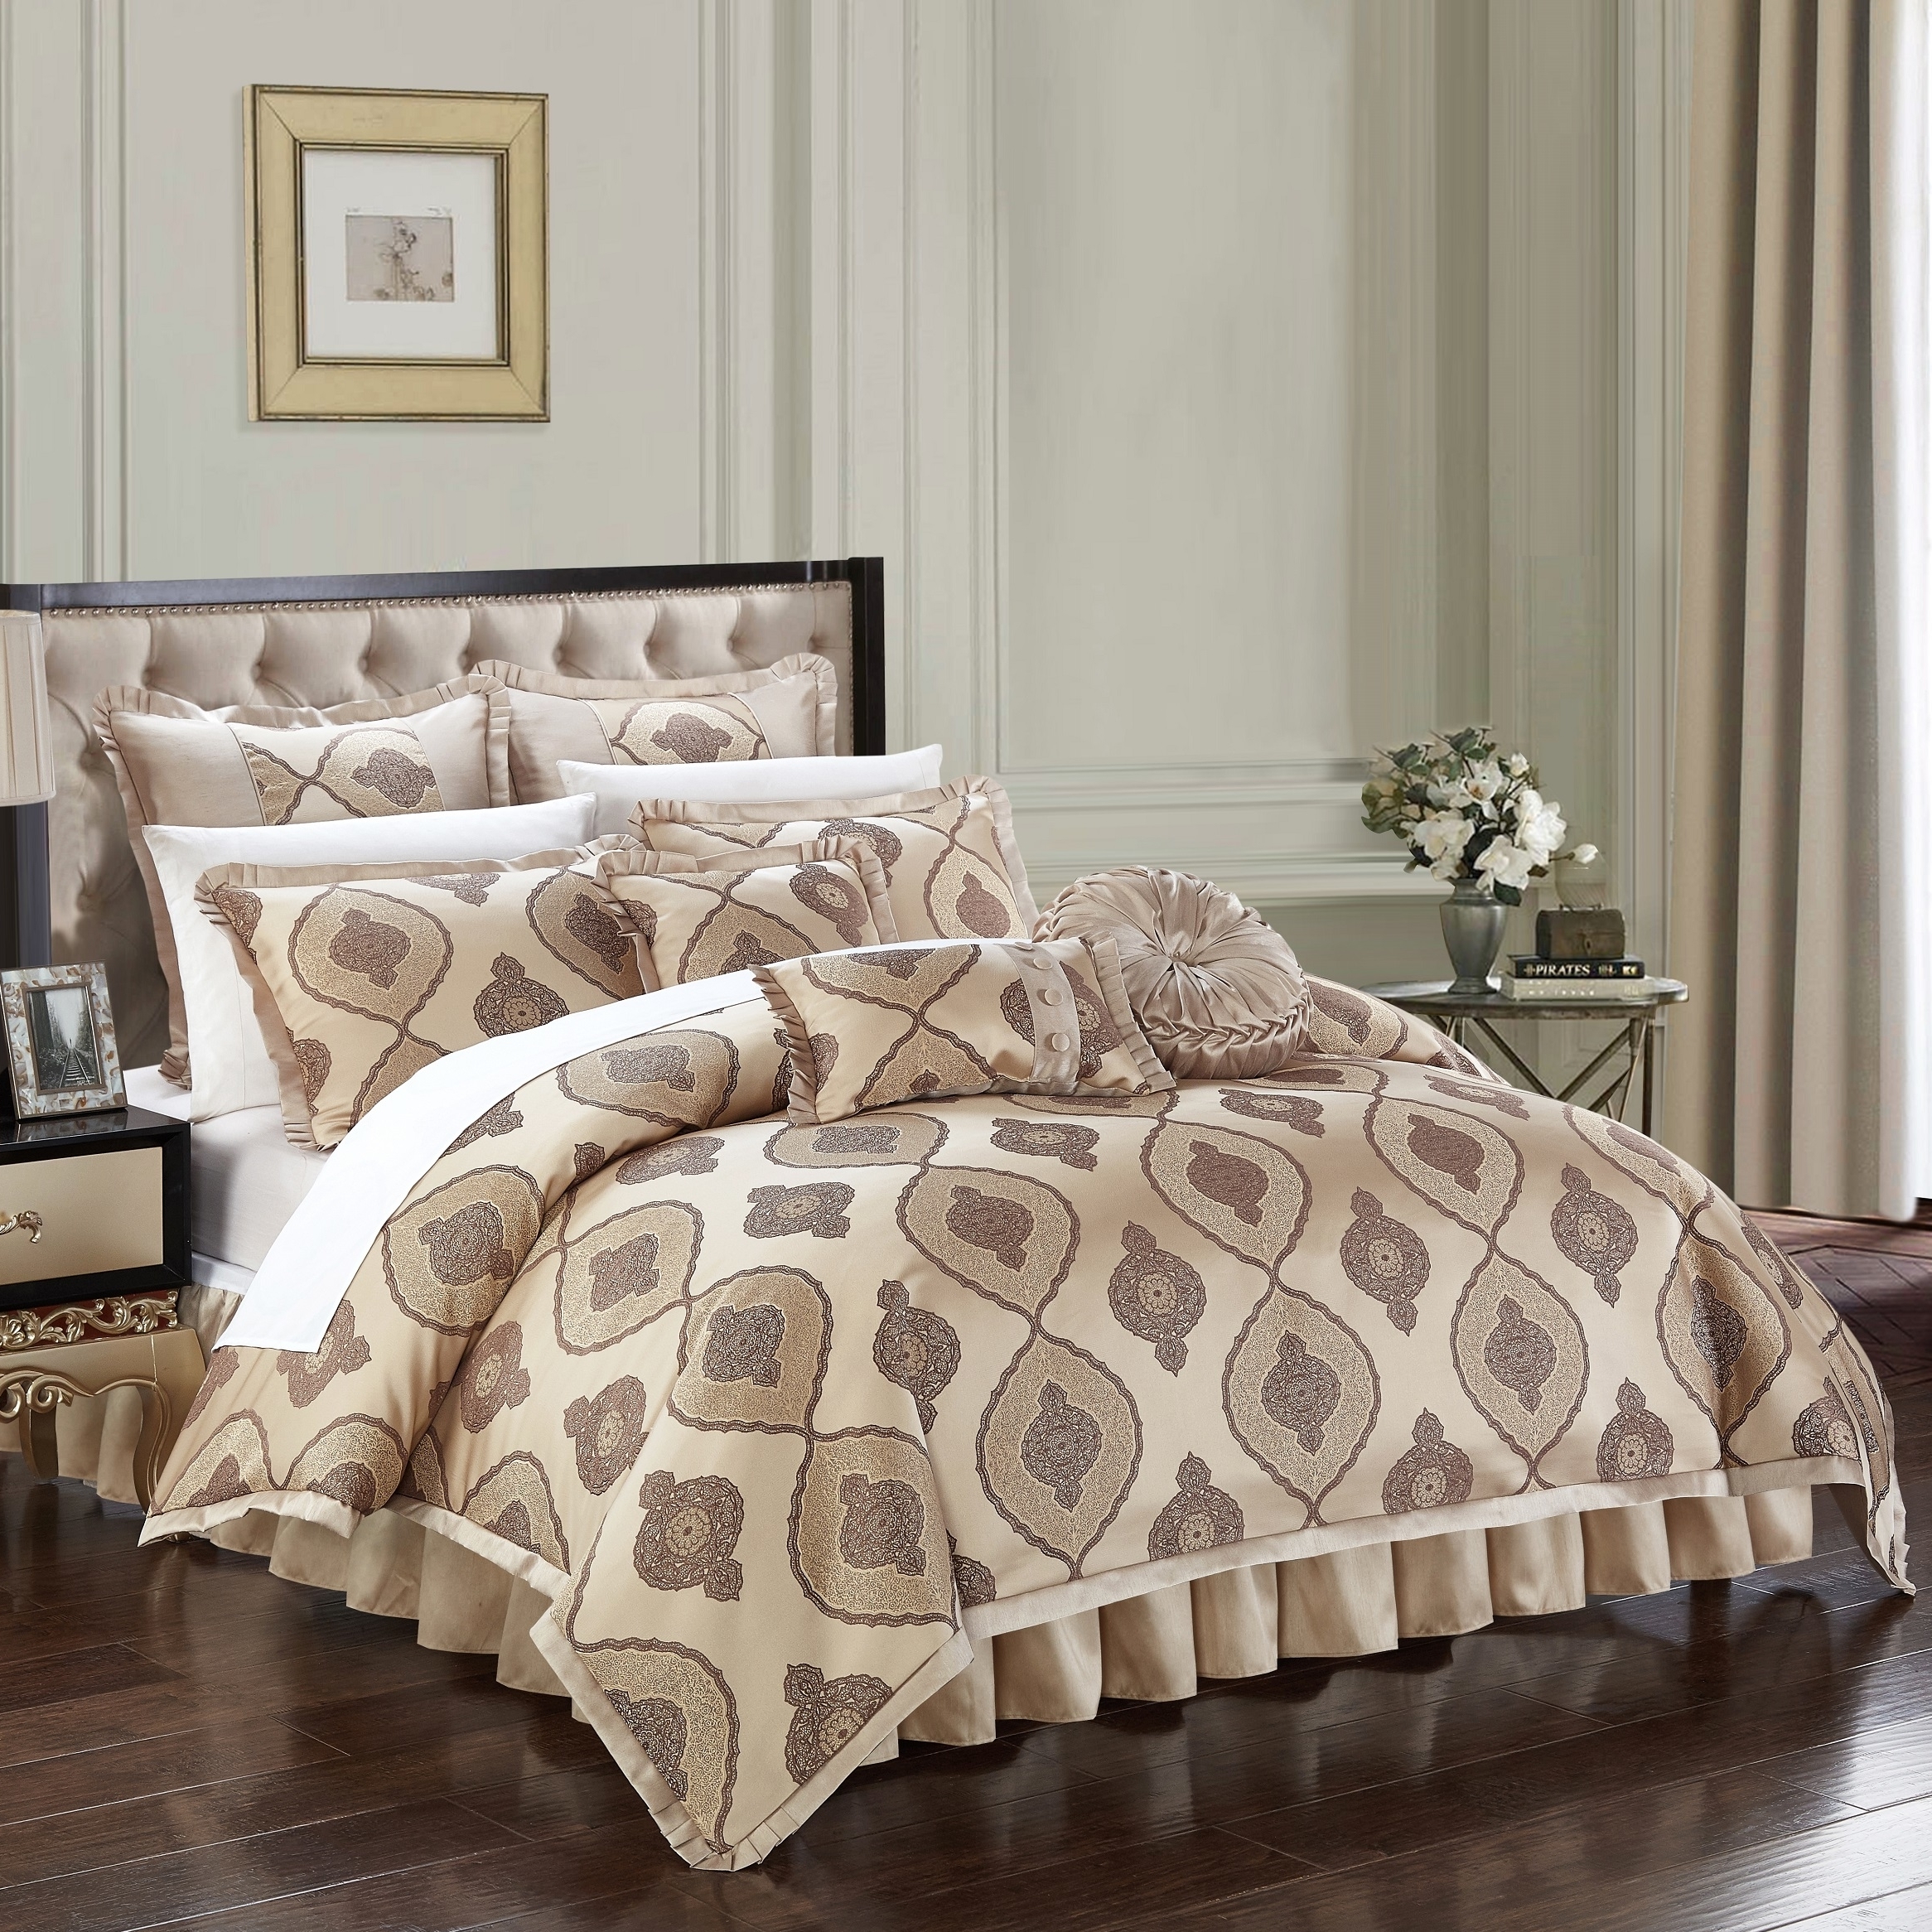 Sisa 9 Piece Comforter Set Jacquard Scroll Faux Silk Bedding With Pleated Flange - Gold, Queen